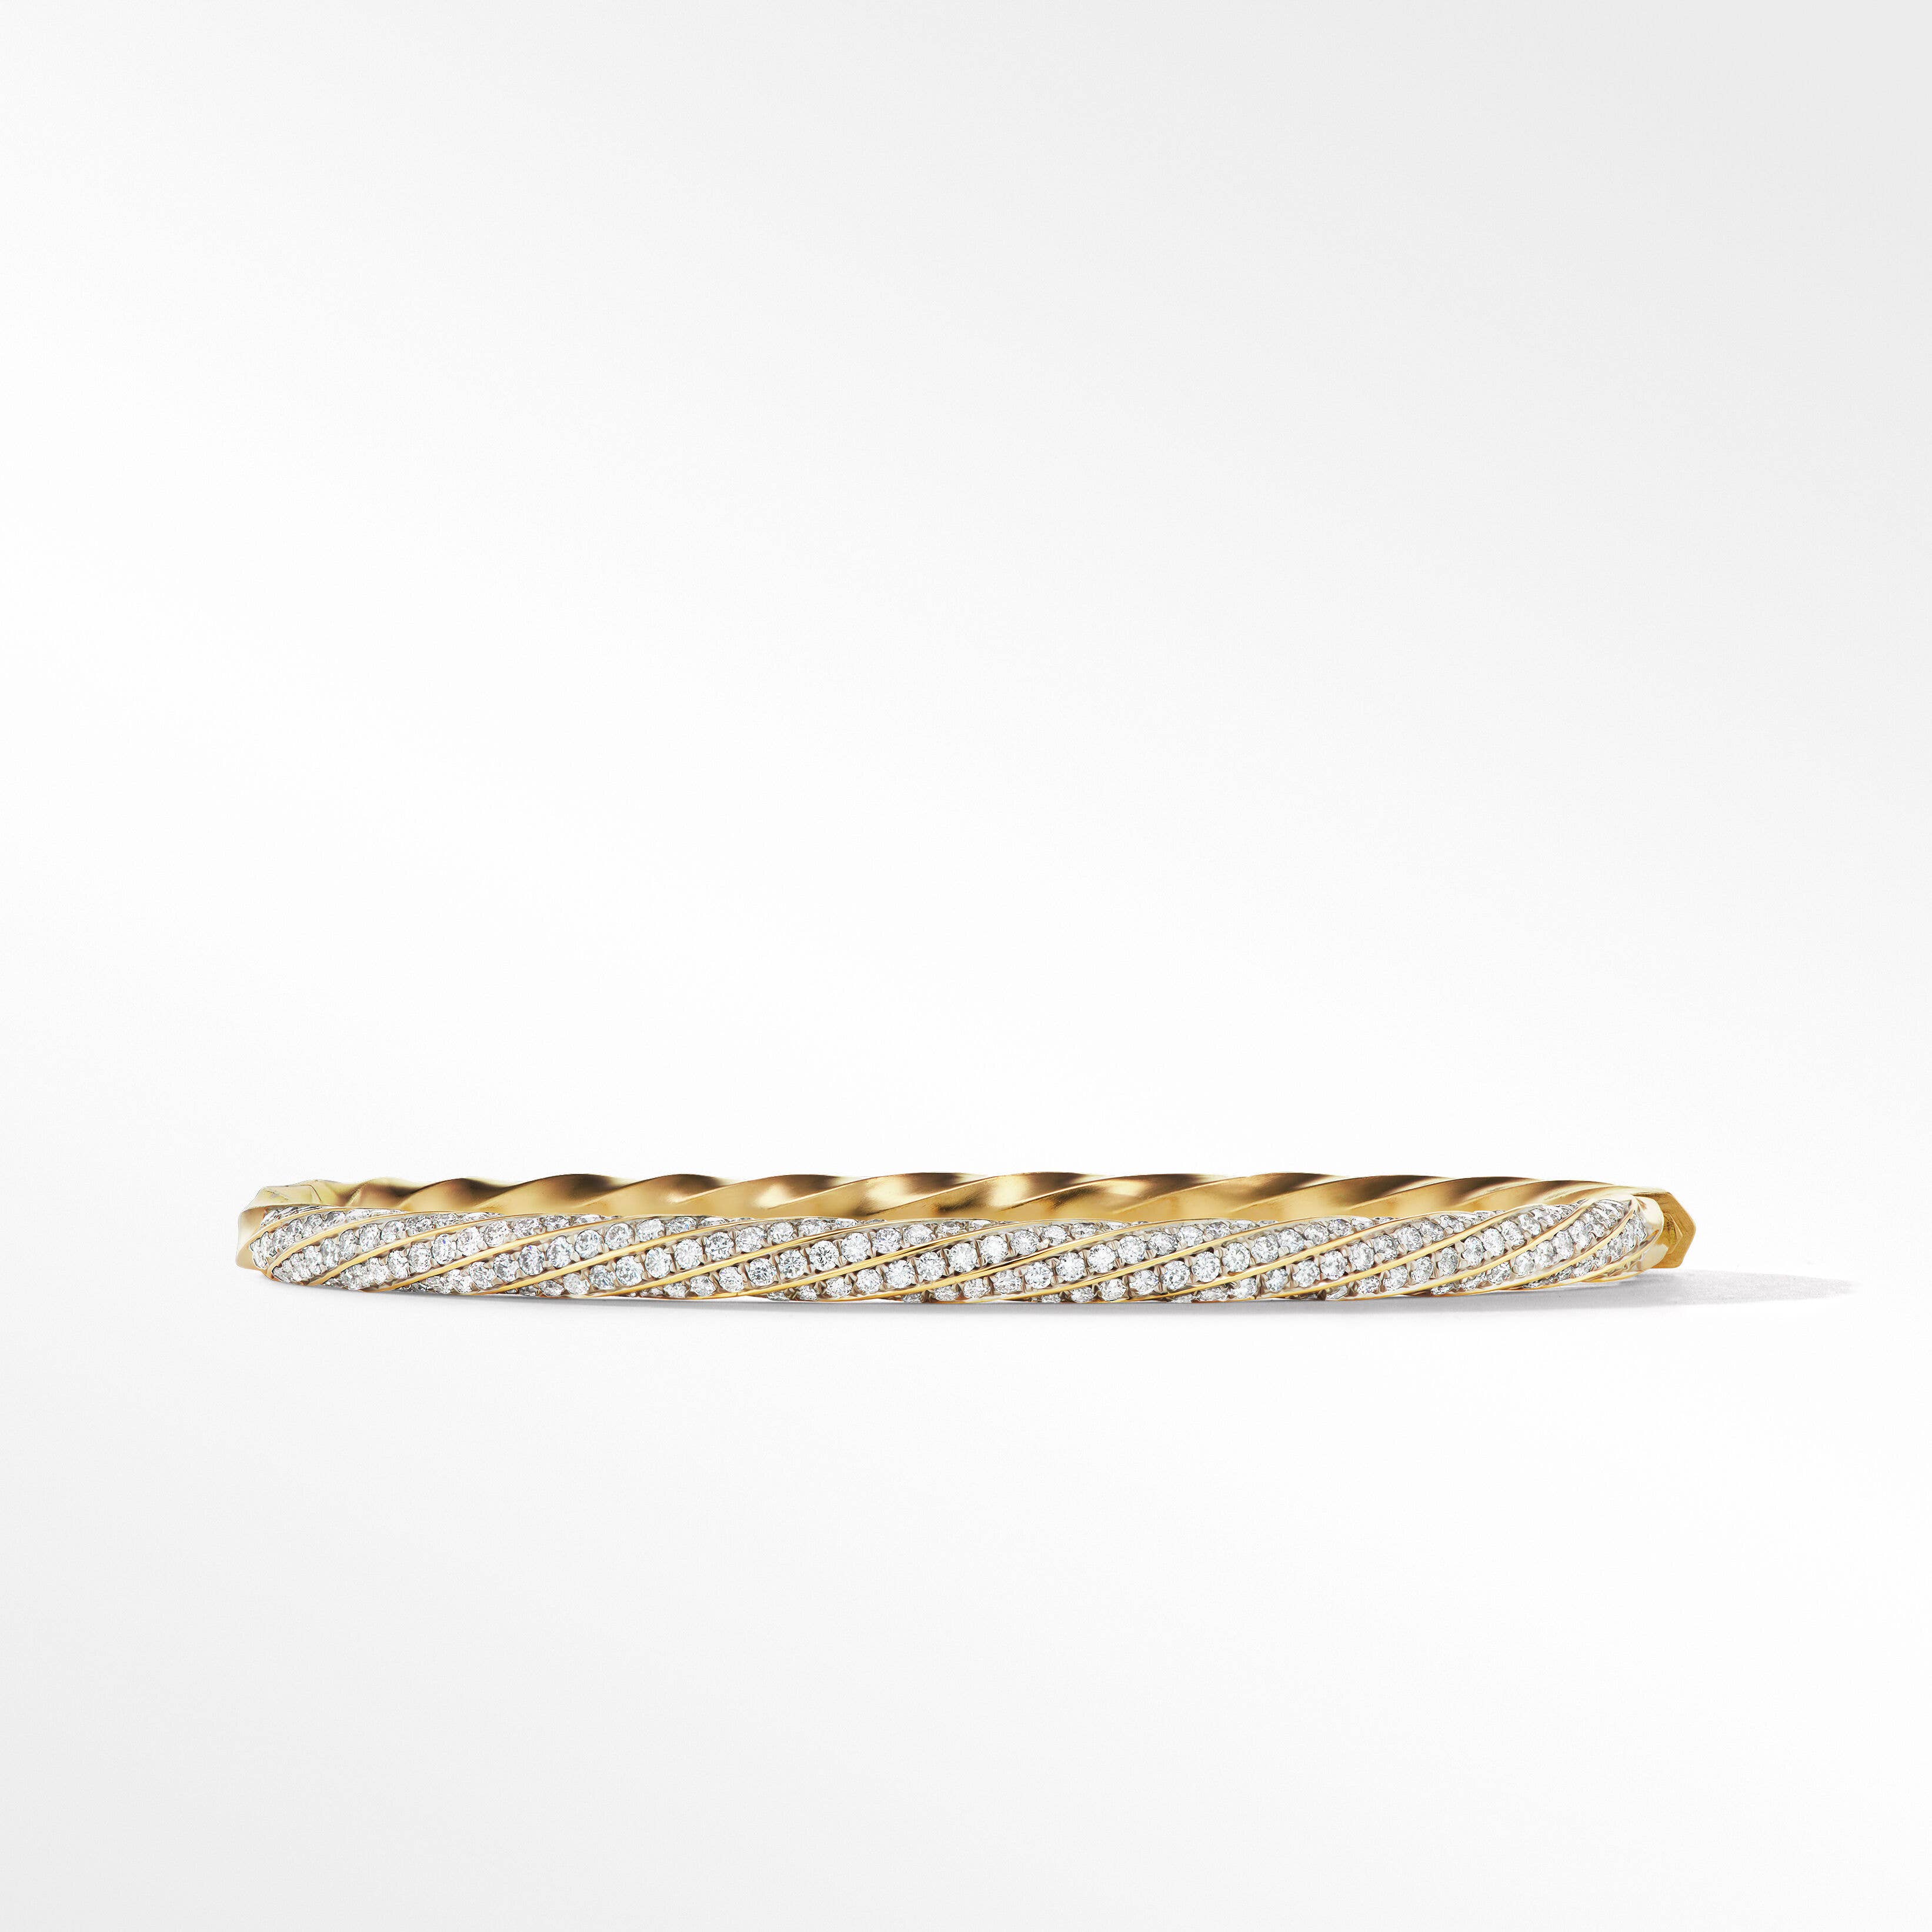 Cable Edge® Bracelet in 18K Yellow Gold with Full Pavé Diamonds